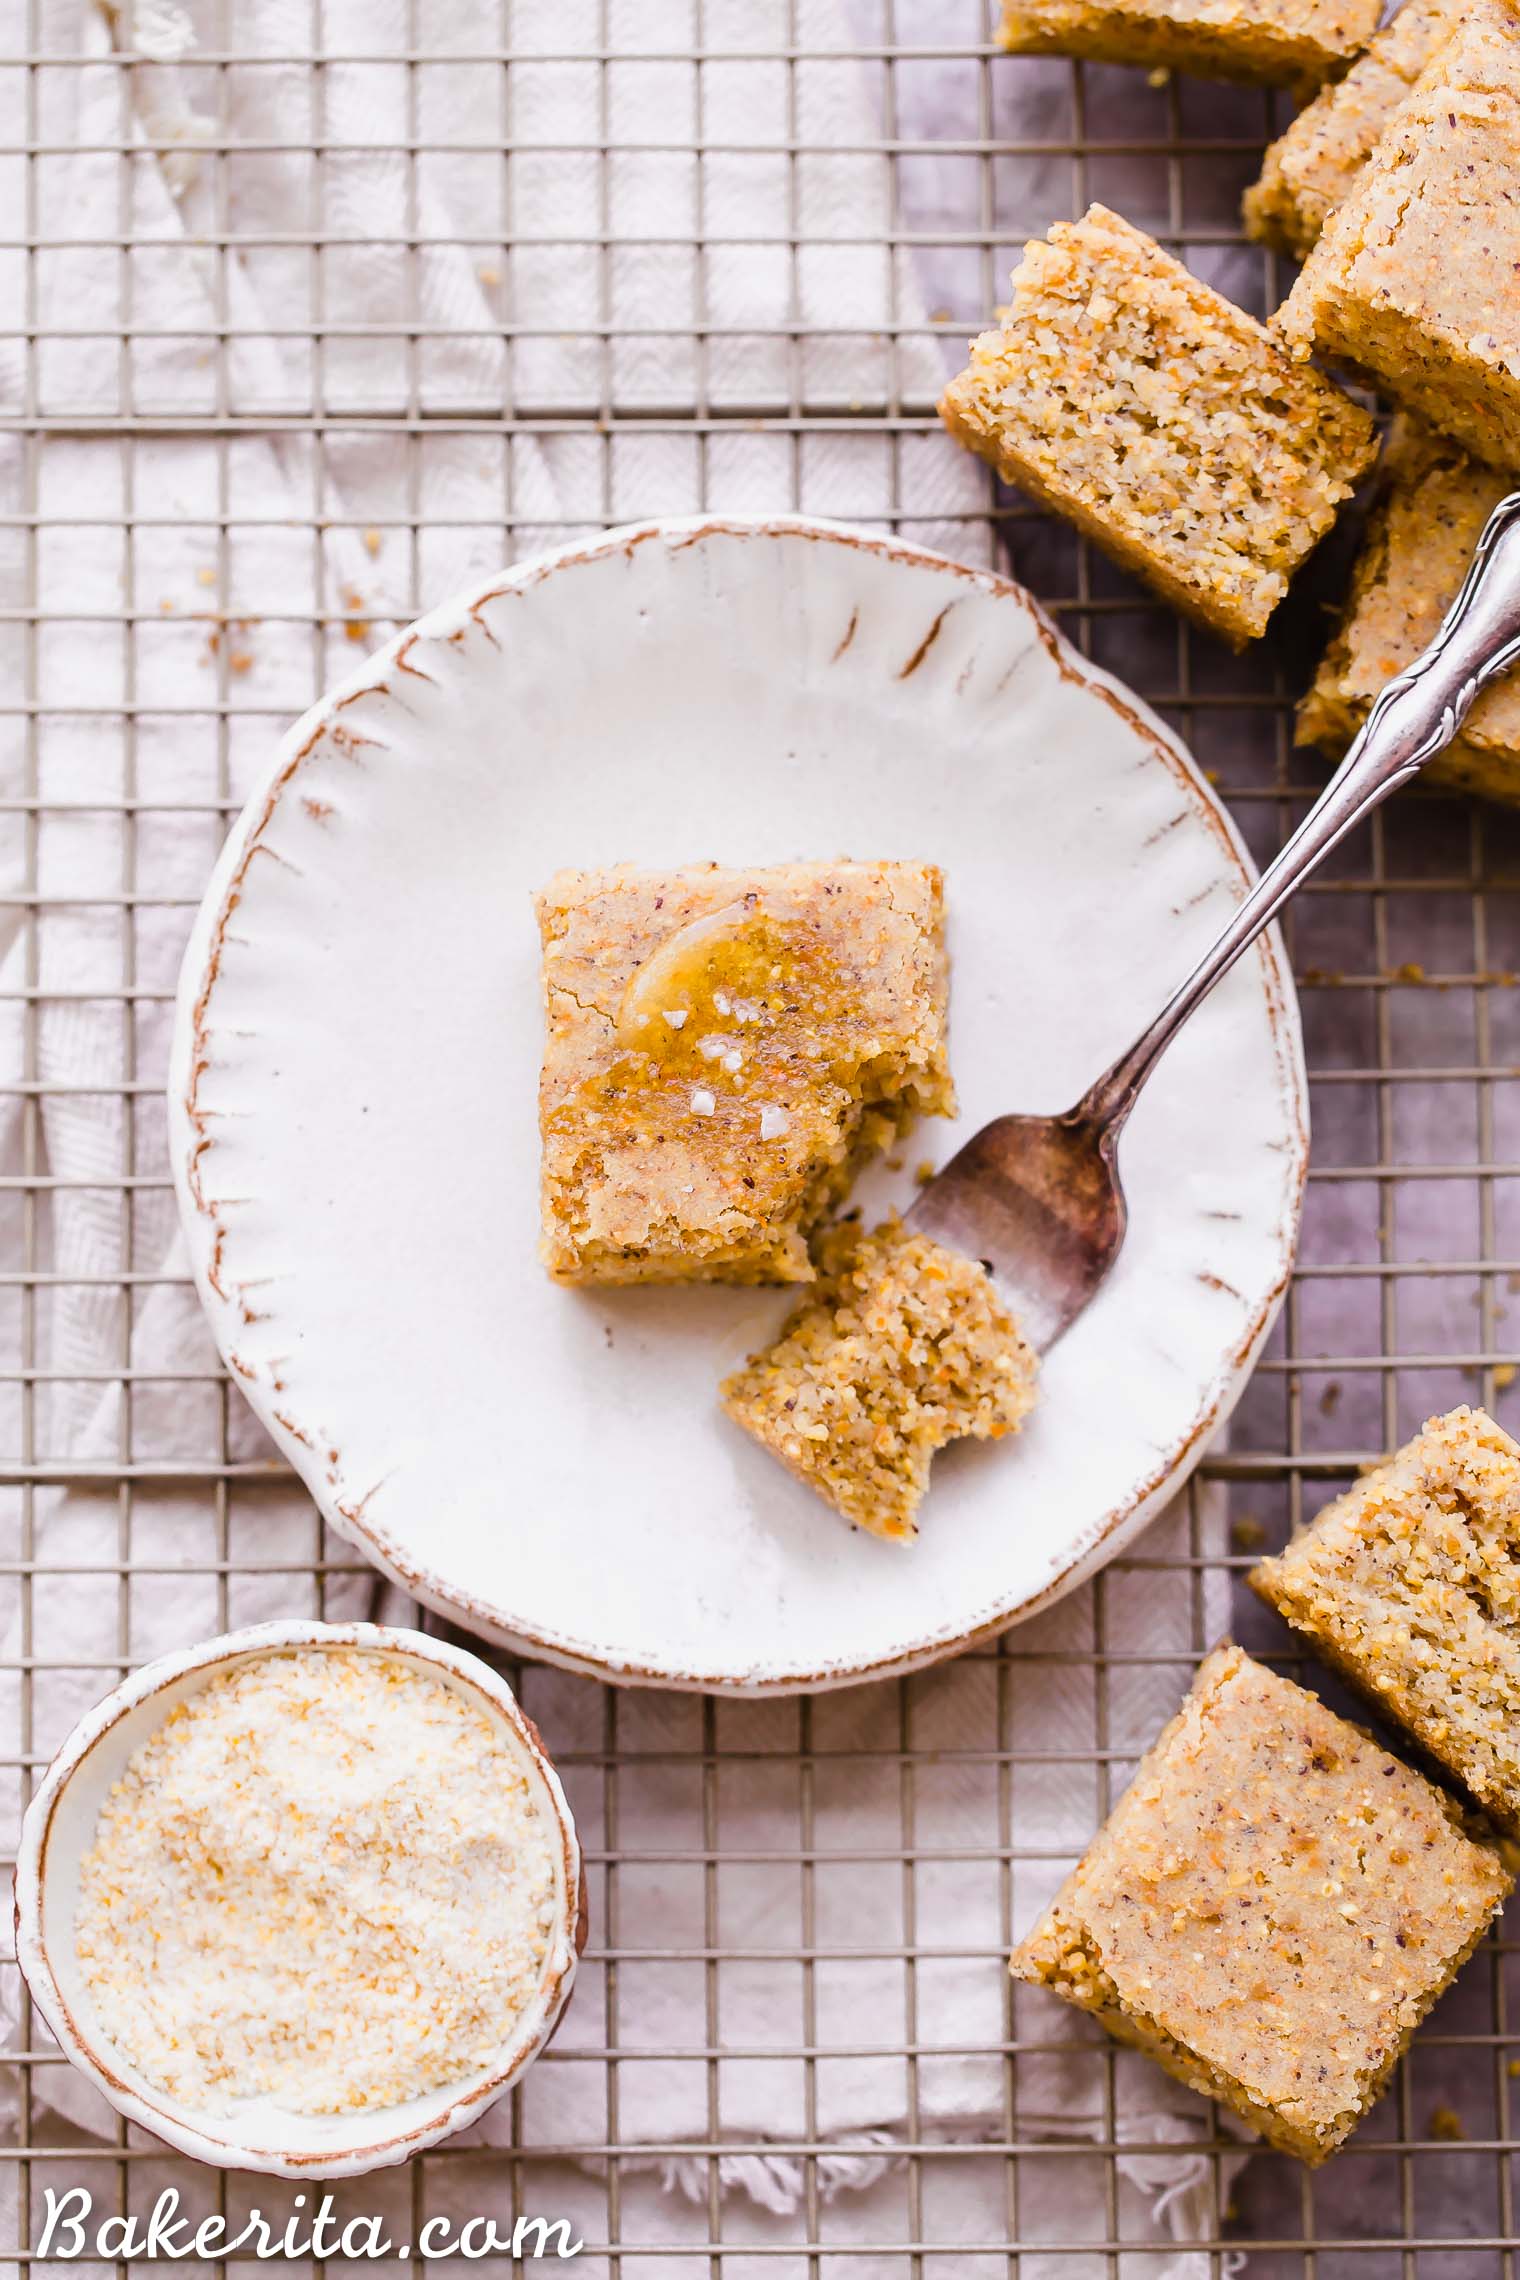 This Gluten Free + Vegan Cornbread is fluffy and light with an amazing texture from the cornmeal! It's perfect served with soup or chili, served as a side or snack, or just topped with a little bit of butter or spread.